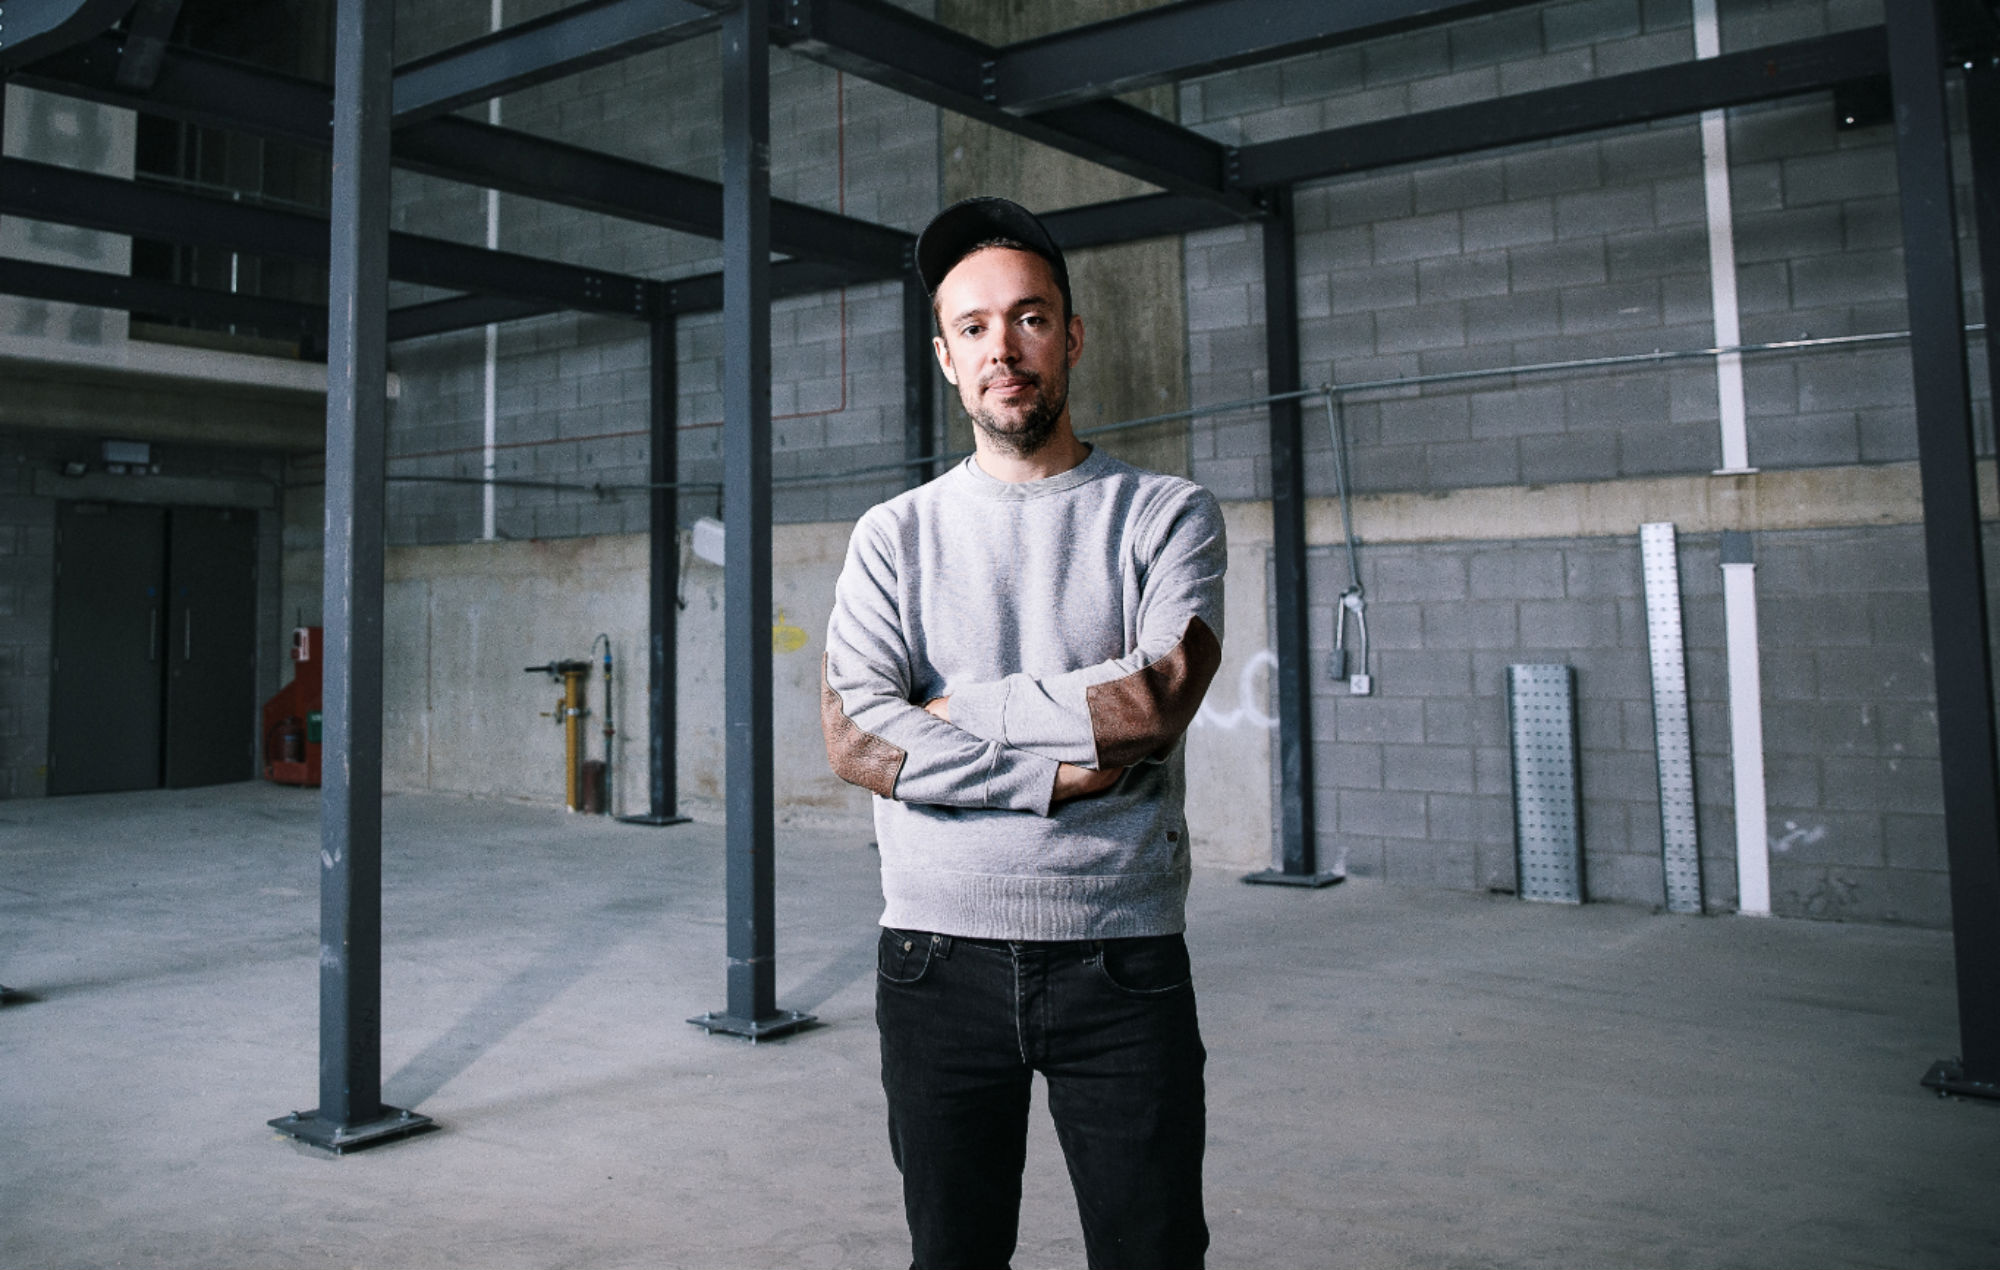 Mumford & Sons’ Ben Lovett on new London venue Lafayette: “It’s inspired by our travels through the Southern states”